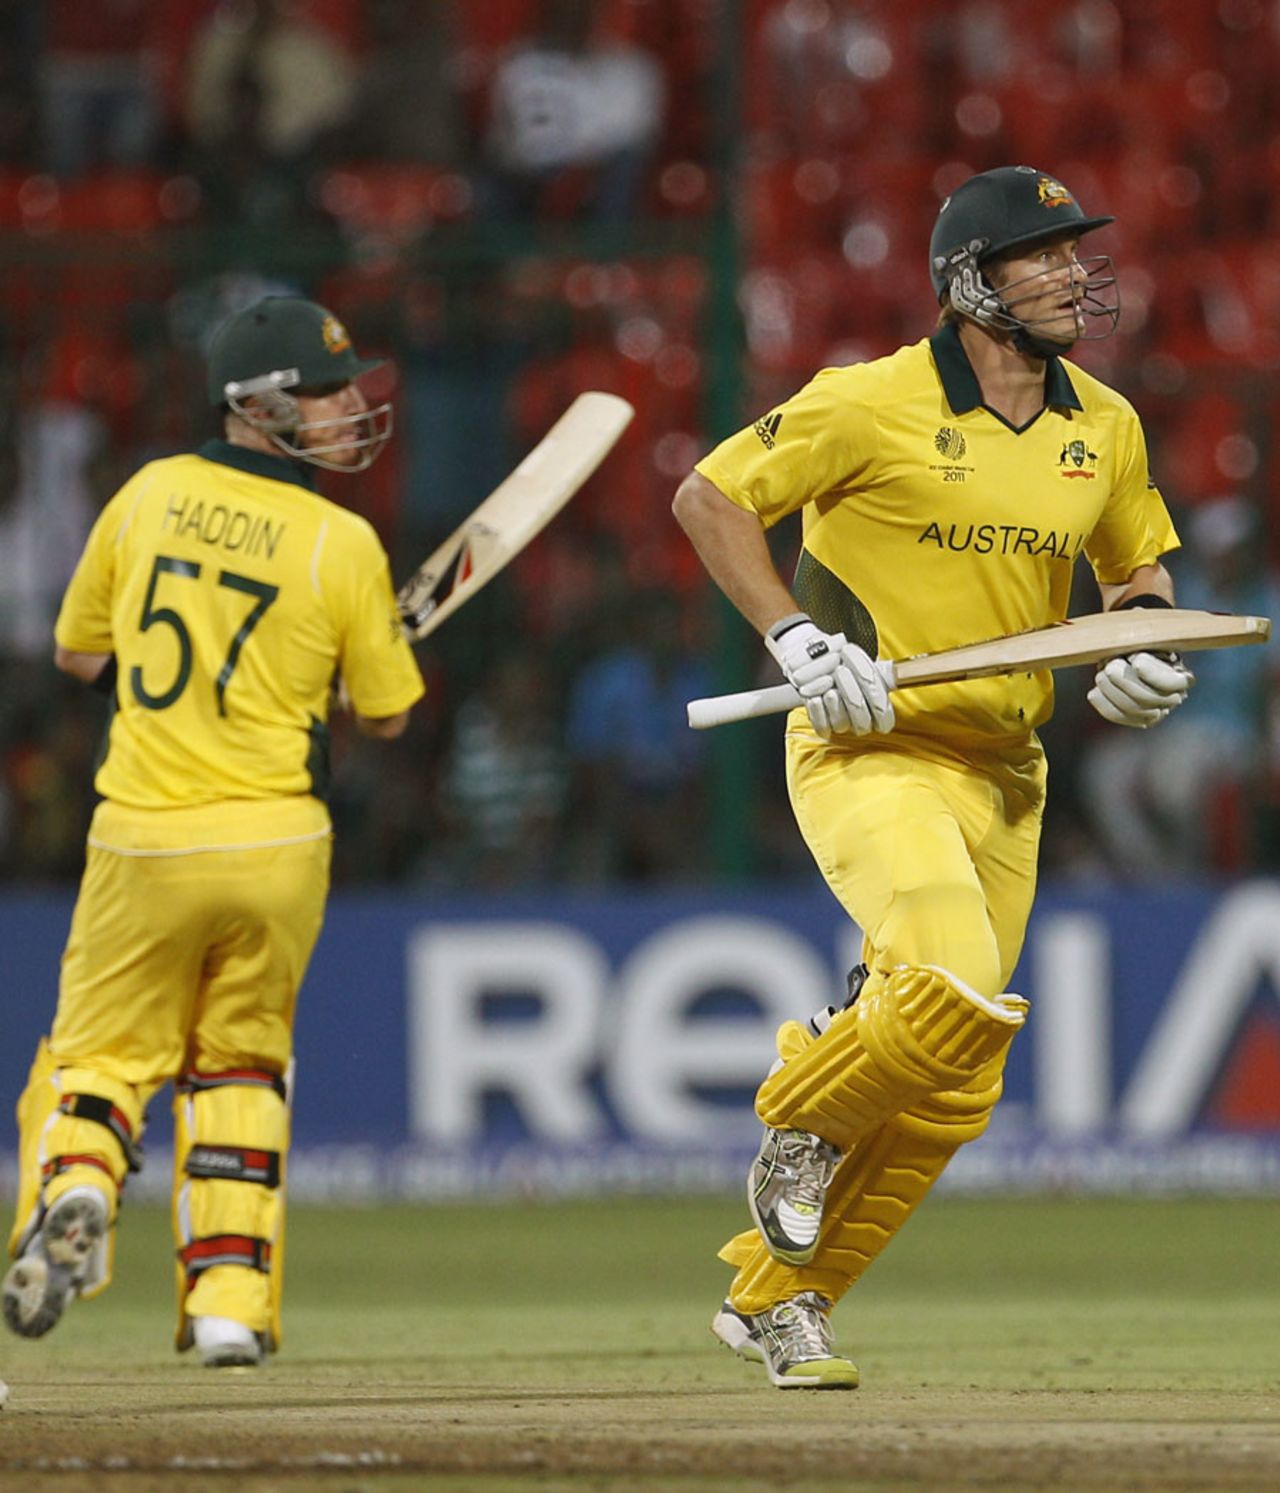 Brad Haddin and Shane Watson take a run during their big opening stand, Australia v Canada, Group A, World Cup, Bangalore, March 16, 2011